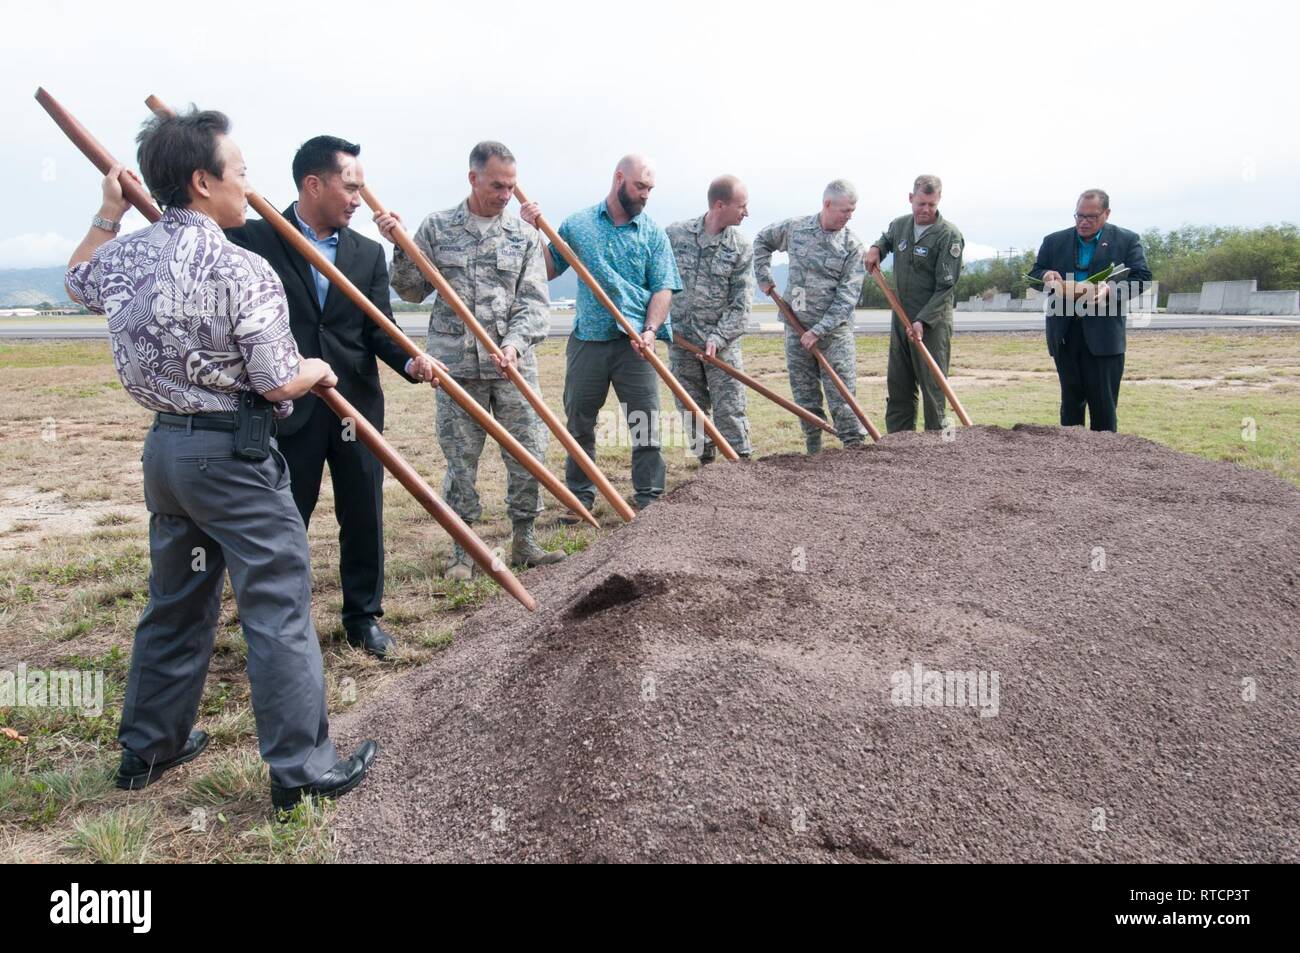 Representatives from Pacific Air Forces, 154th Wing, 15th Wing, Air Force Civil Engineer Center, and the United States Army Corps of Engineers participate in a ground-breaking ceremony for the new F-22 Aerospace Control Alert (ACA) Facility on Feb 14, 2019 at Joint Base Pearl Harbor-Hickam, Hawaii. The blessing was performed by Kahu Kelekona Bishaw and included seven ground-breaking o’o sticks used in traditional Hawaiian ceremonies. Stock Photo